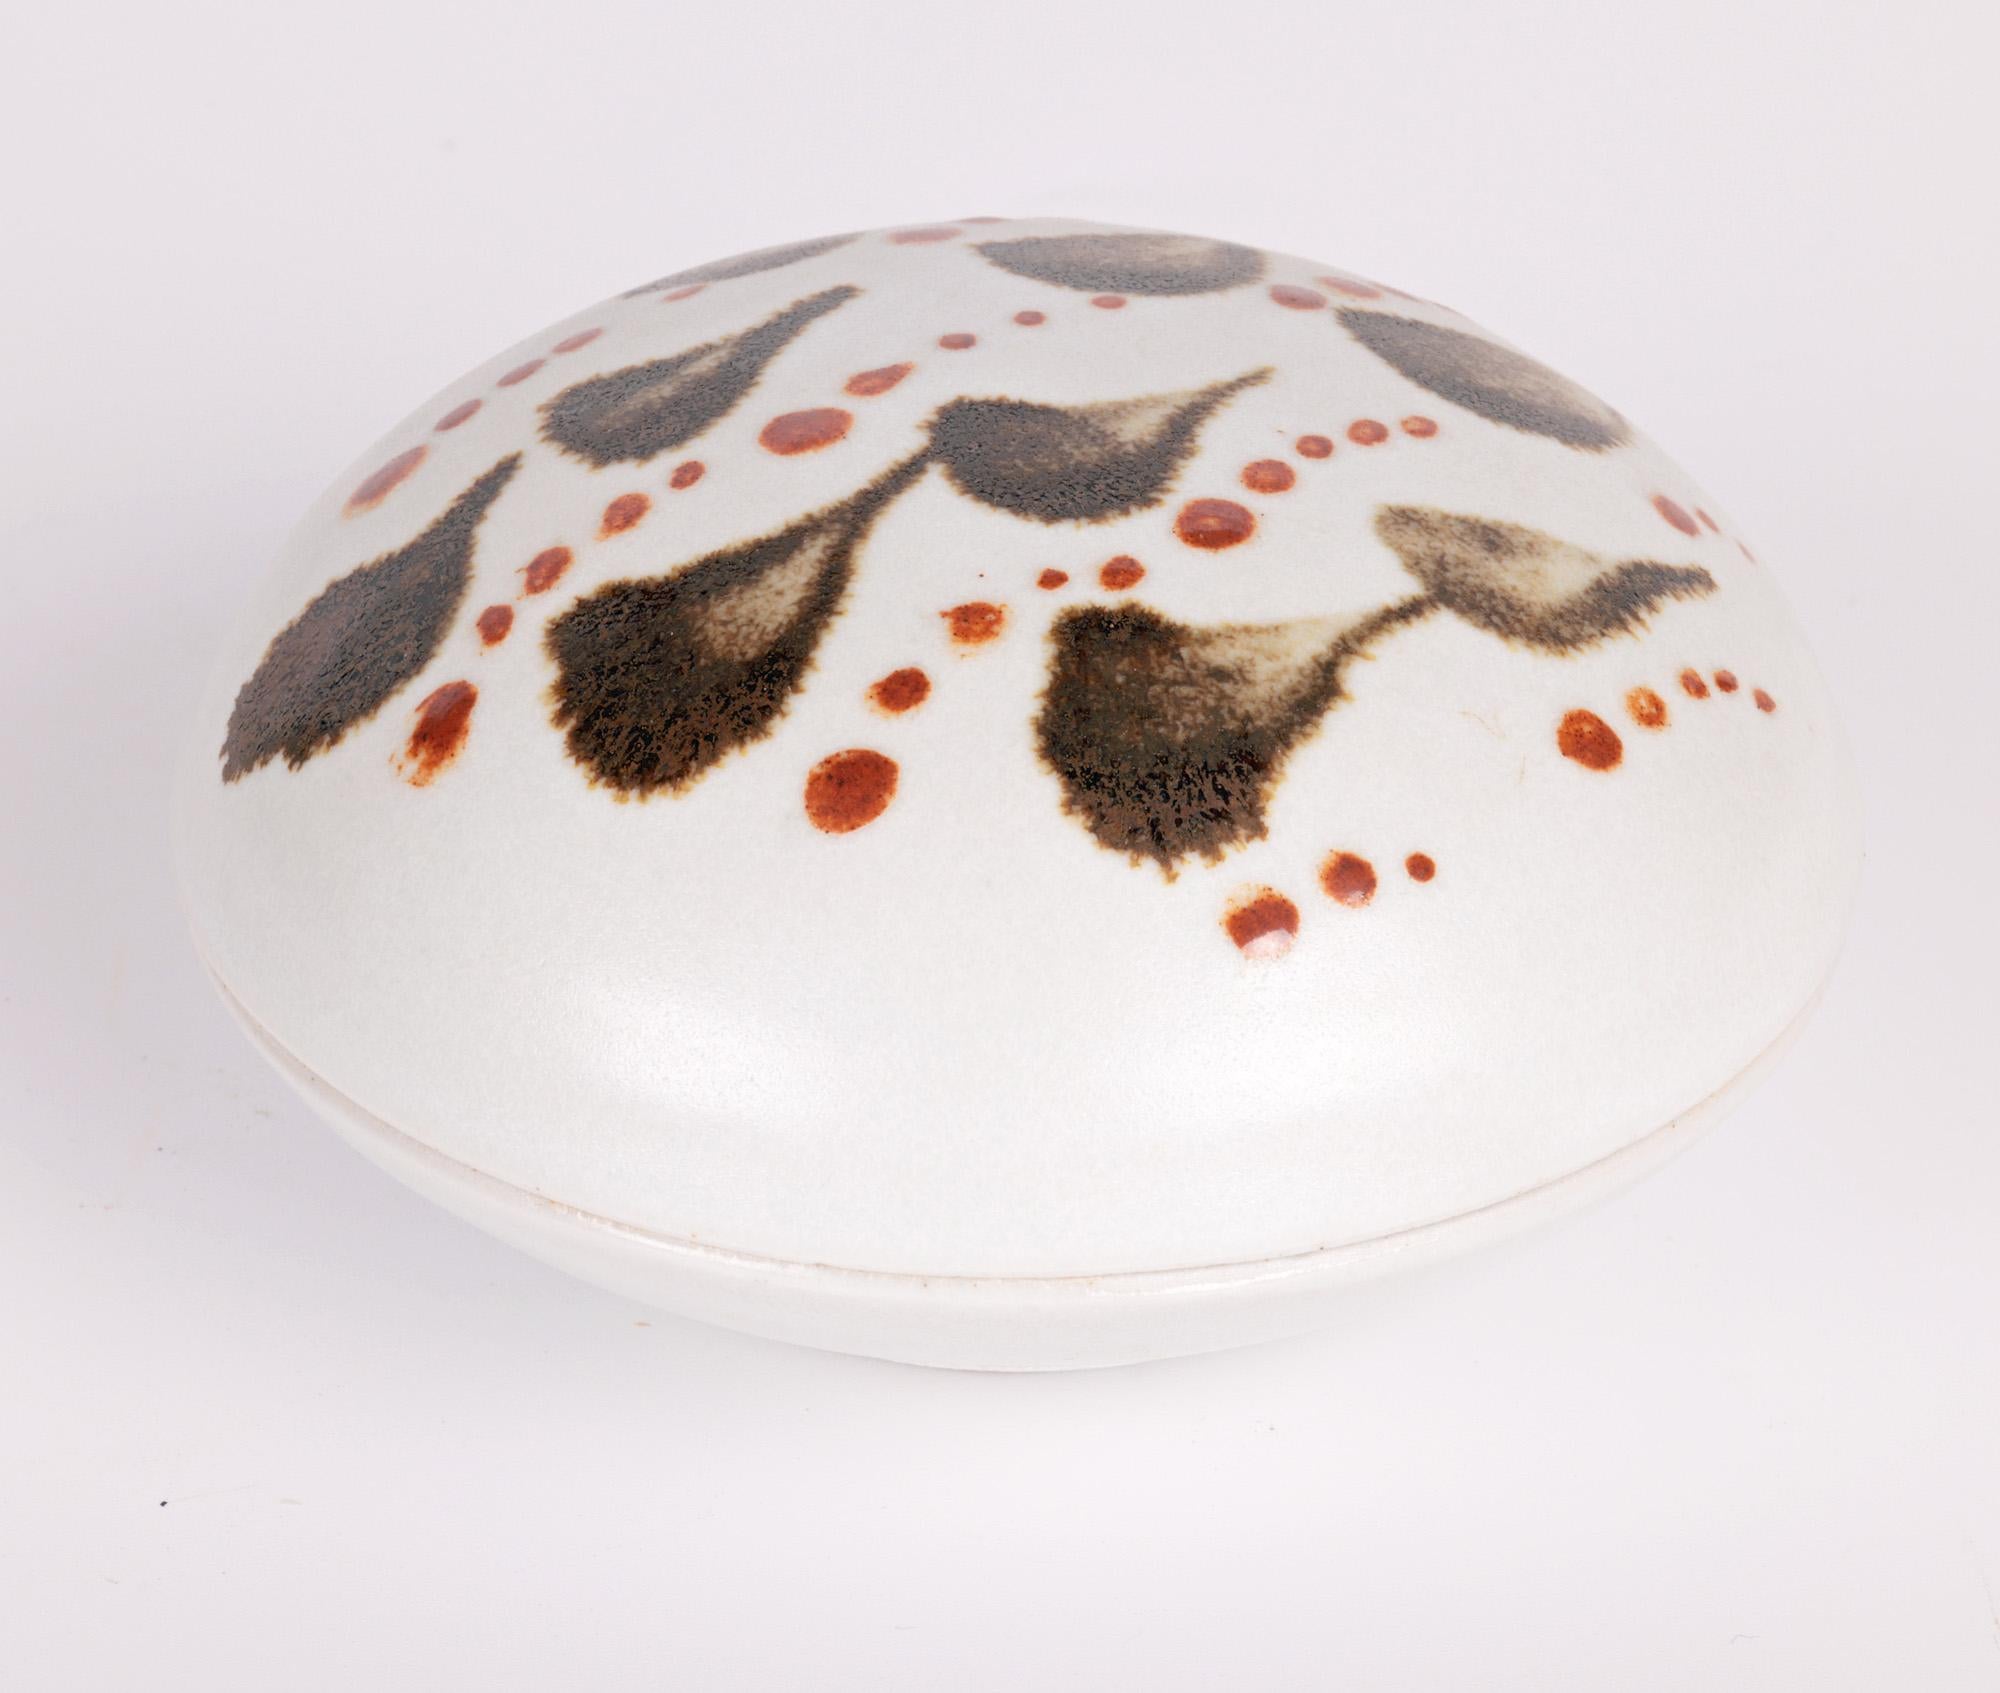 Amanda Brier Leach Pottery Porcelain Lidded Box with Stylized Leaf Patterning  For Sale 4